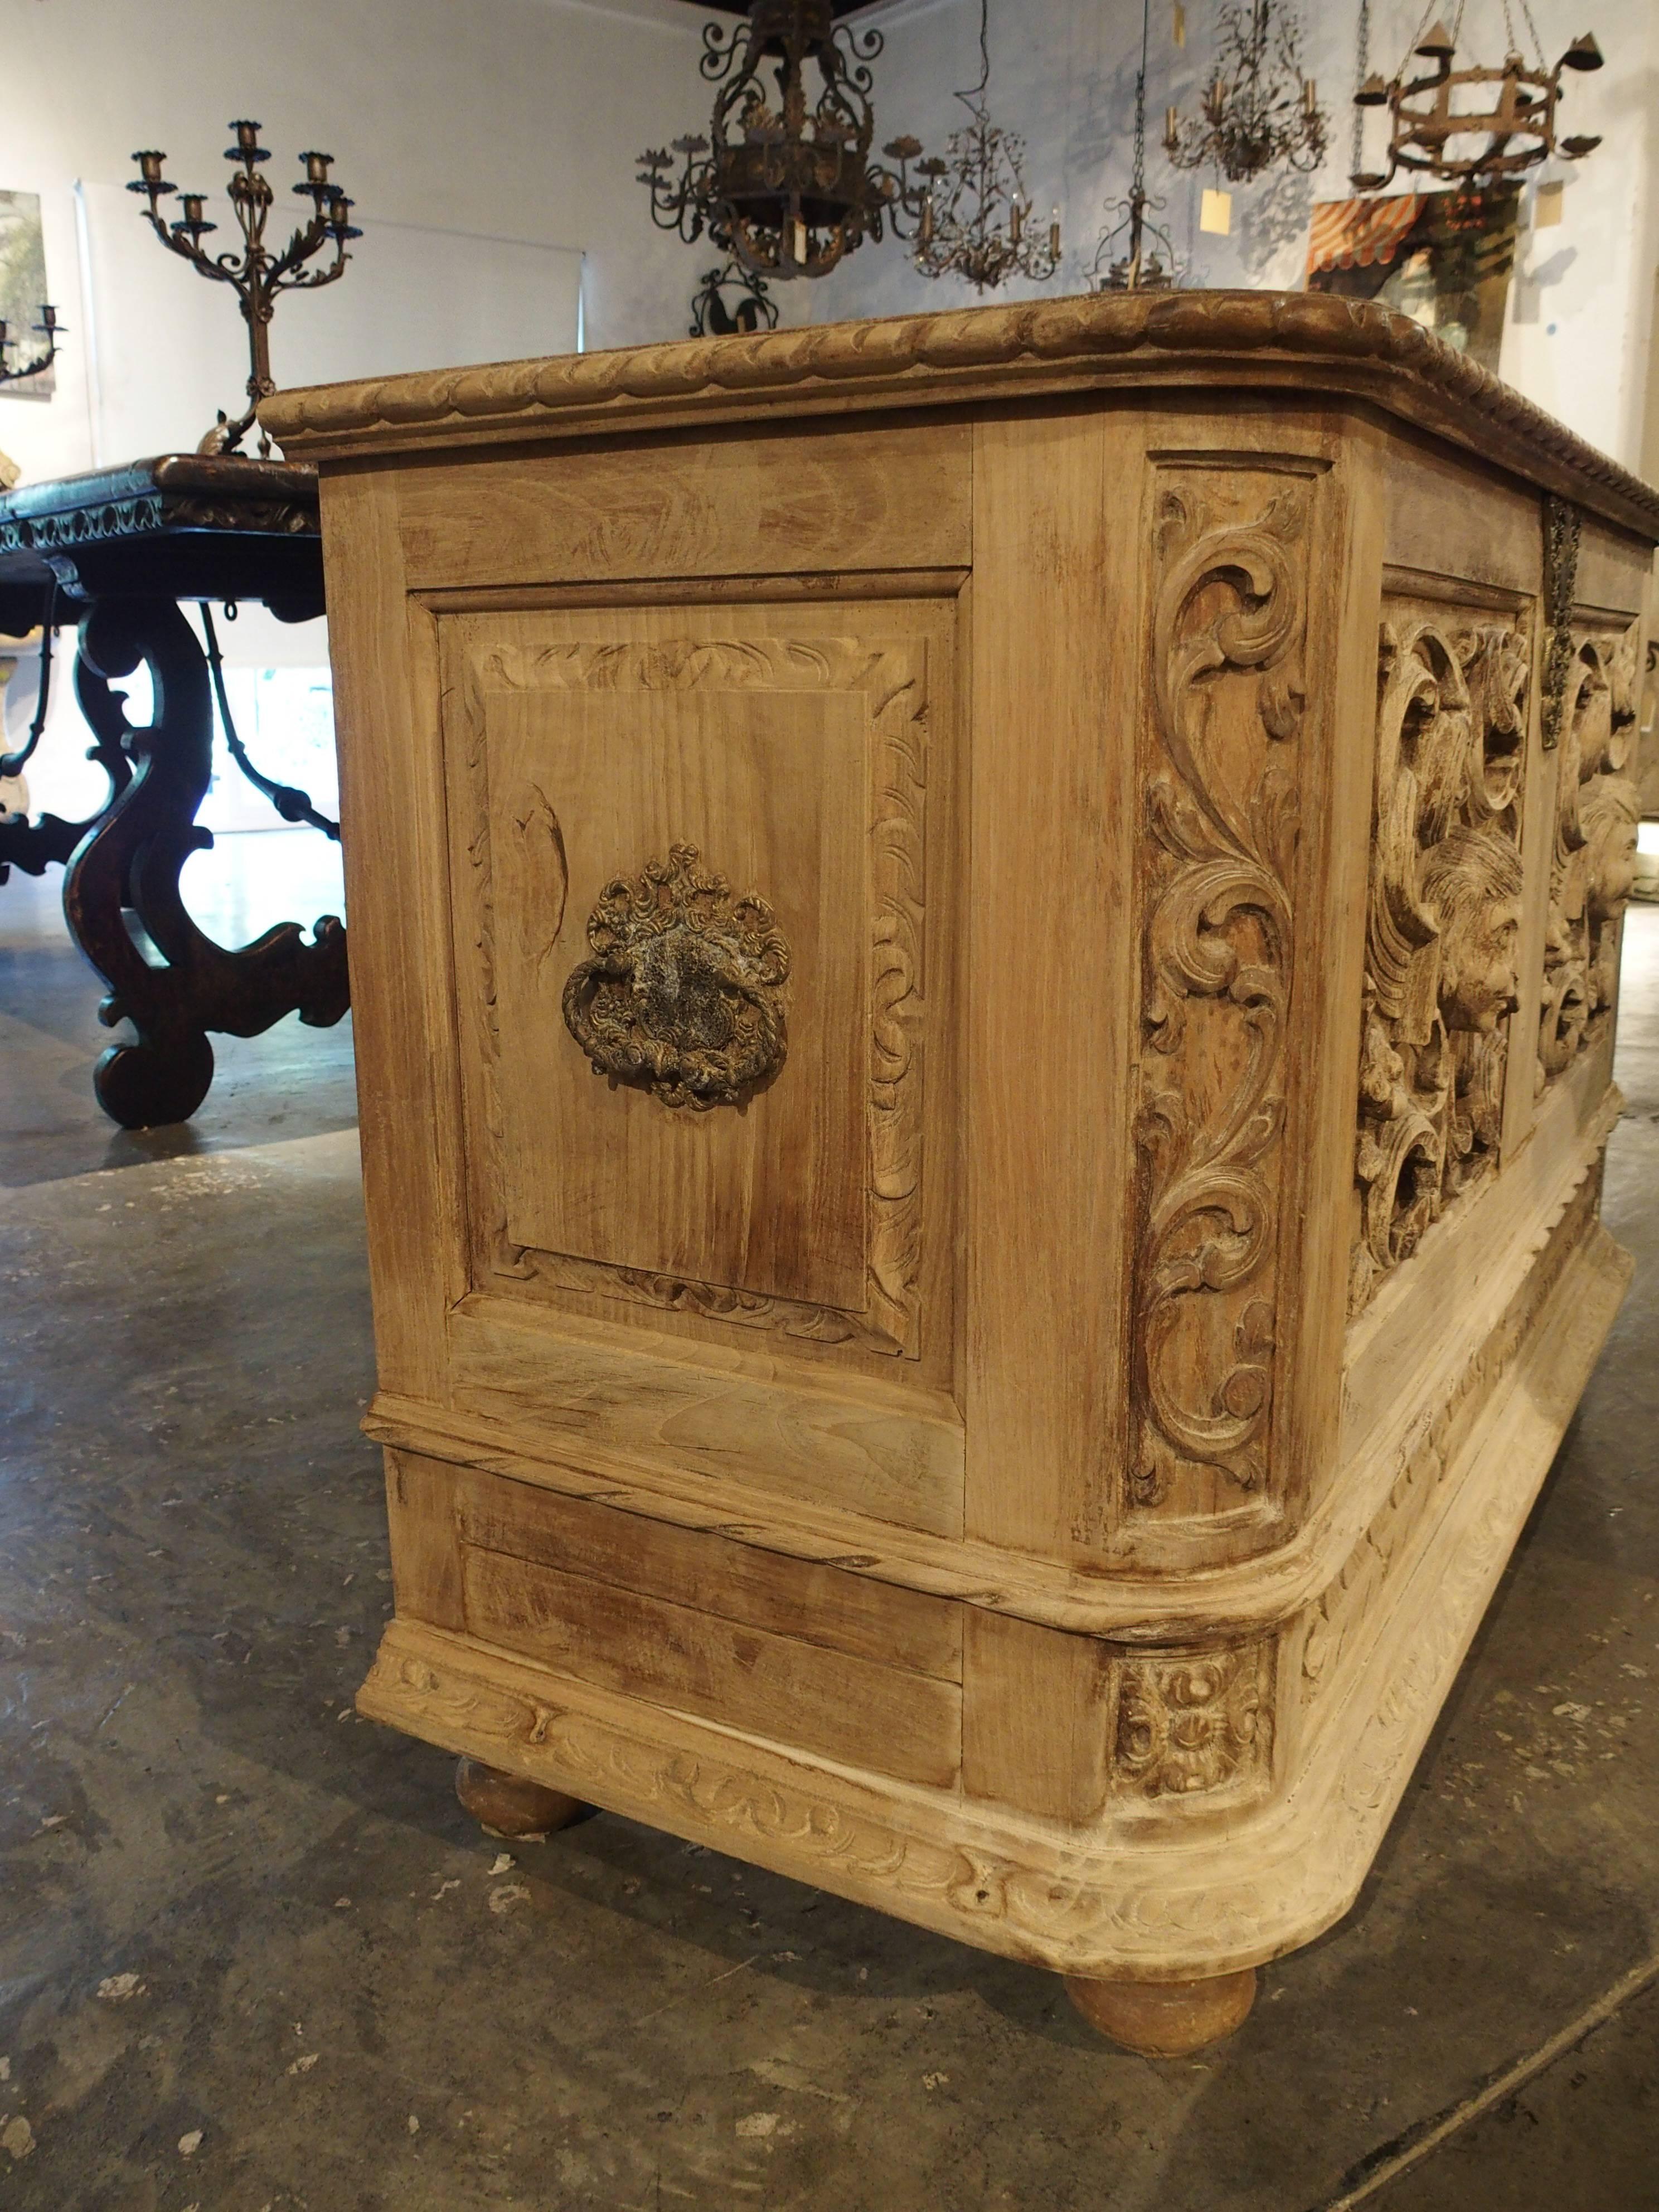 Wood Well-Carved Stripped Trunk from Italy